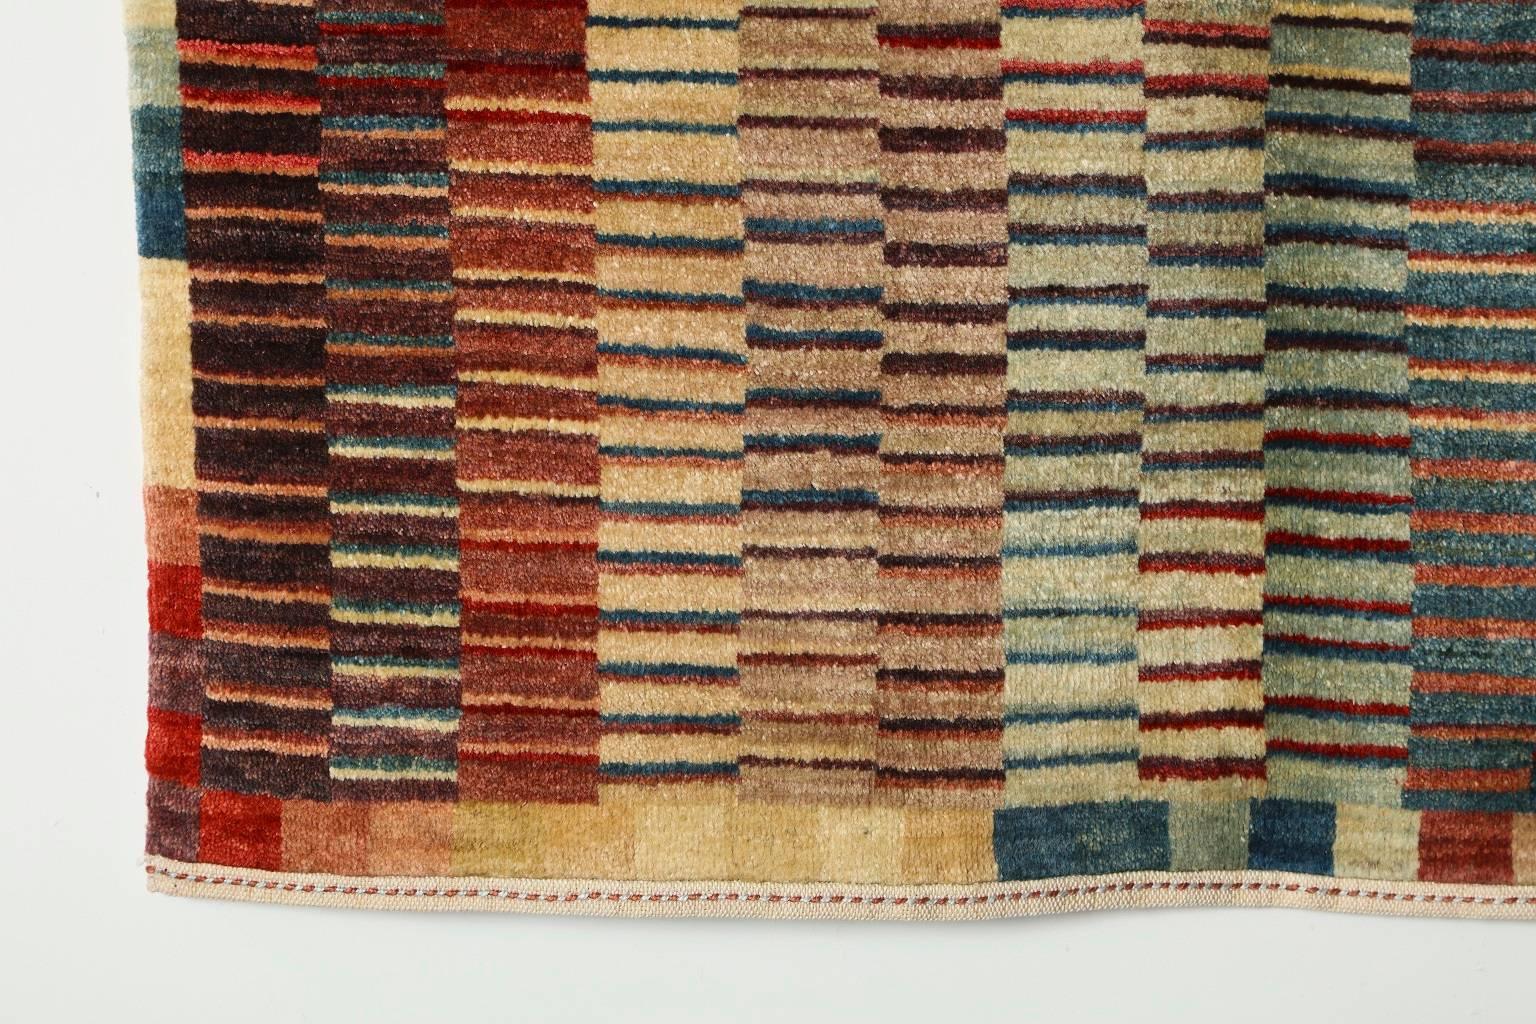 Orley Shabahang Signature Carpet in Handspun Wool and Vegetable Dyes 1